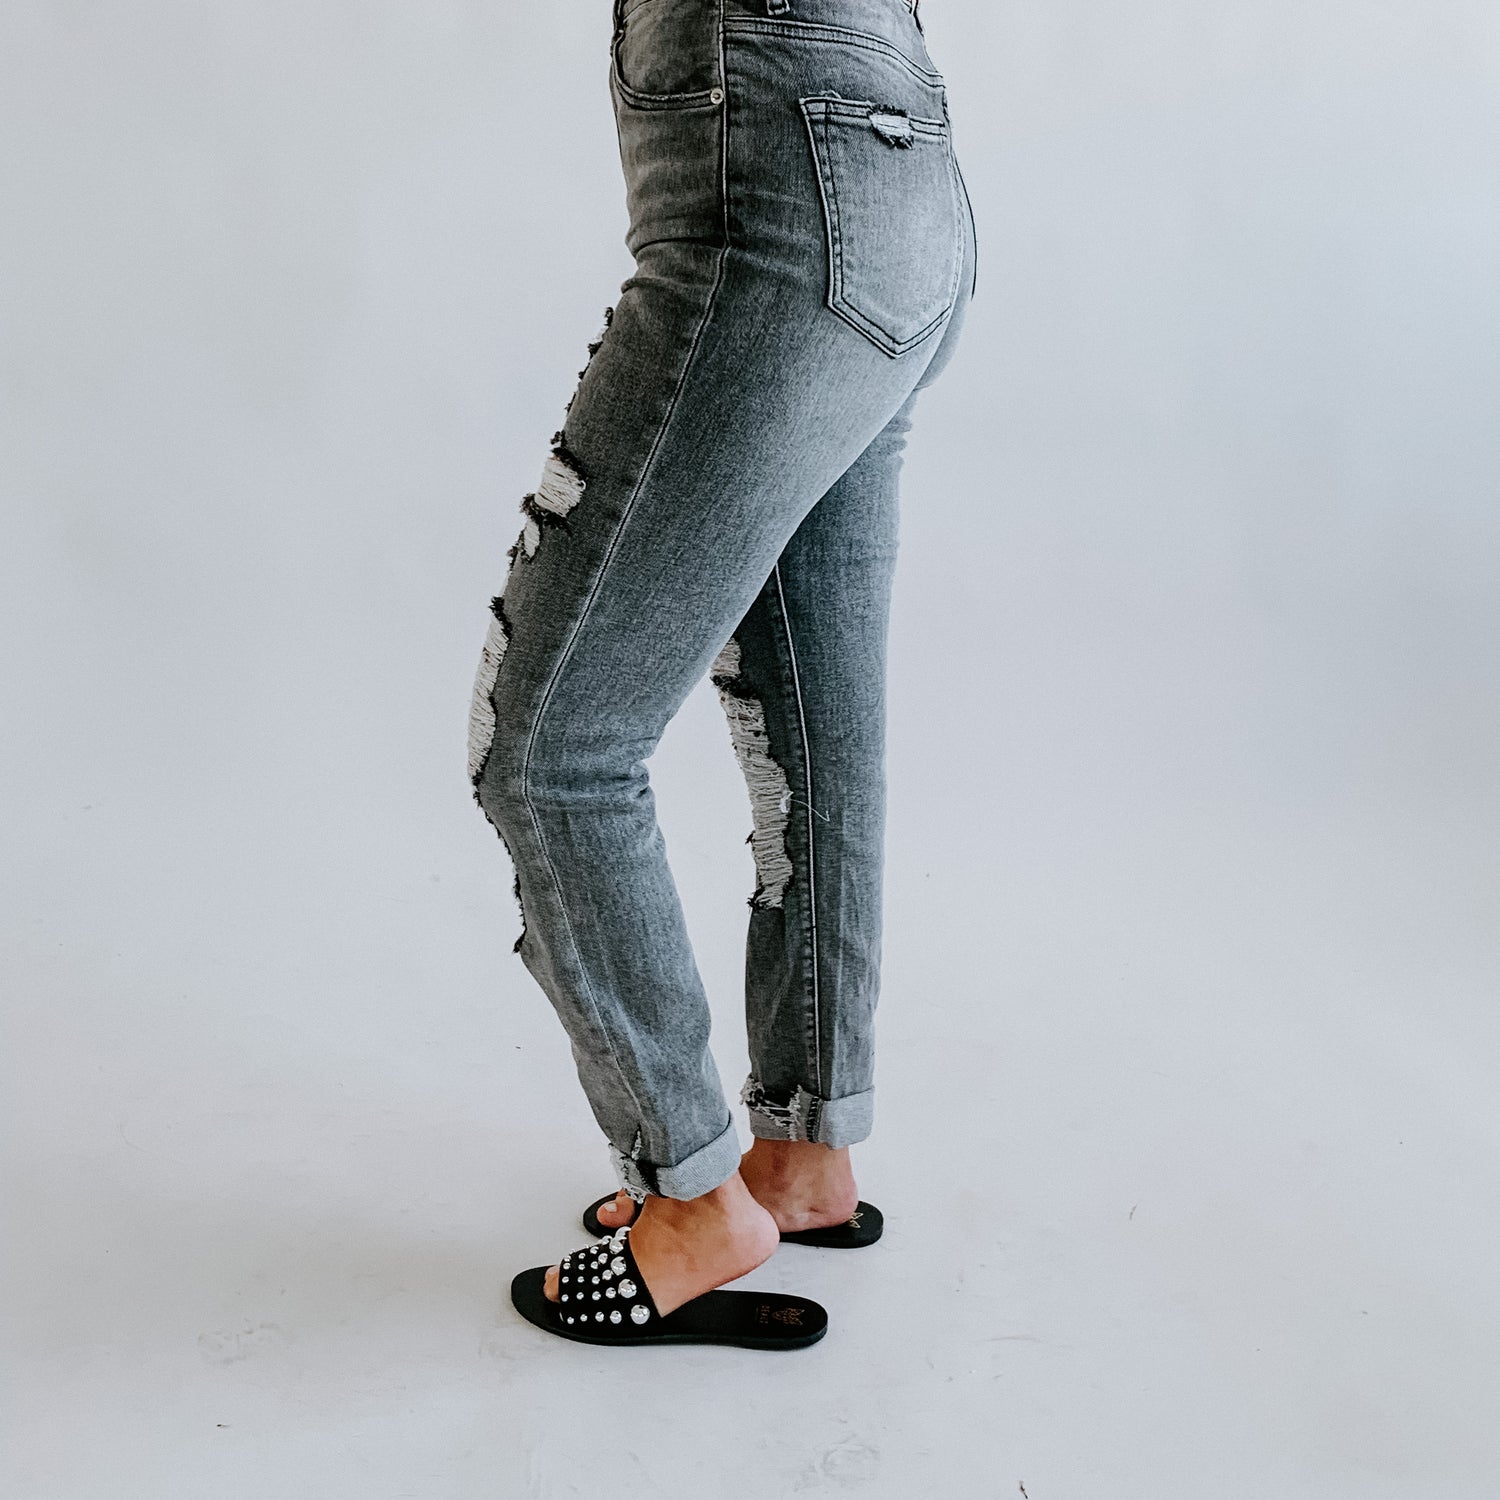 Selby Distressed Relaxed Skinny Jean FINAL SALE